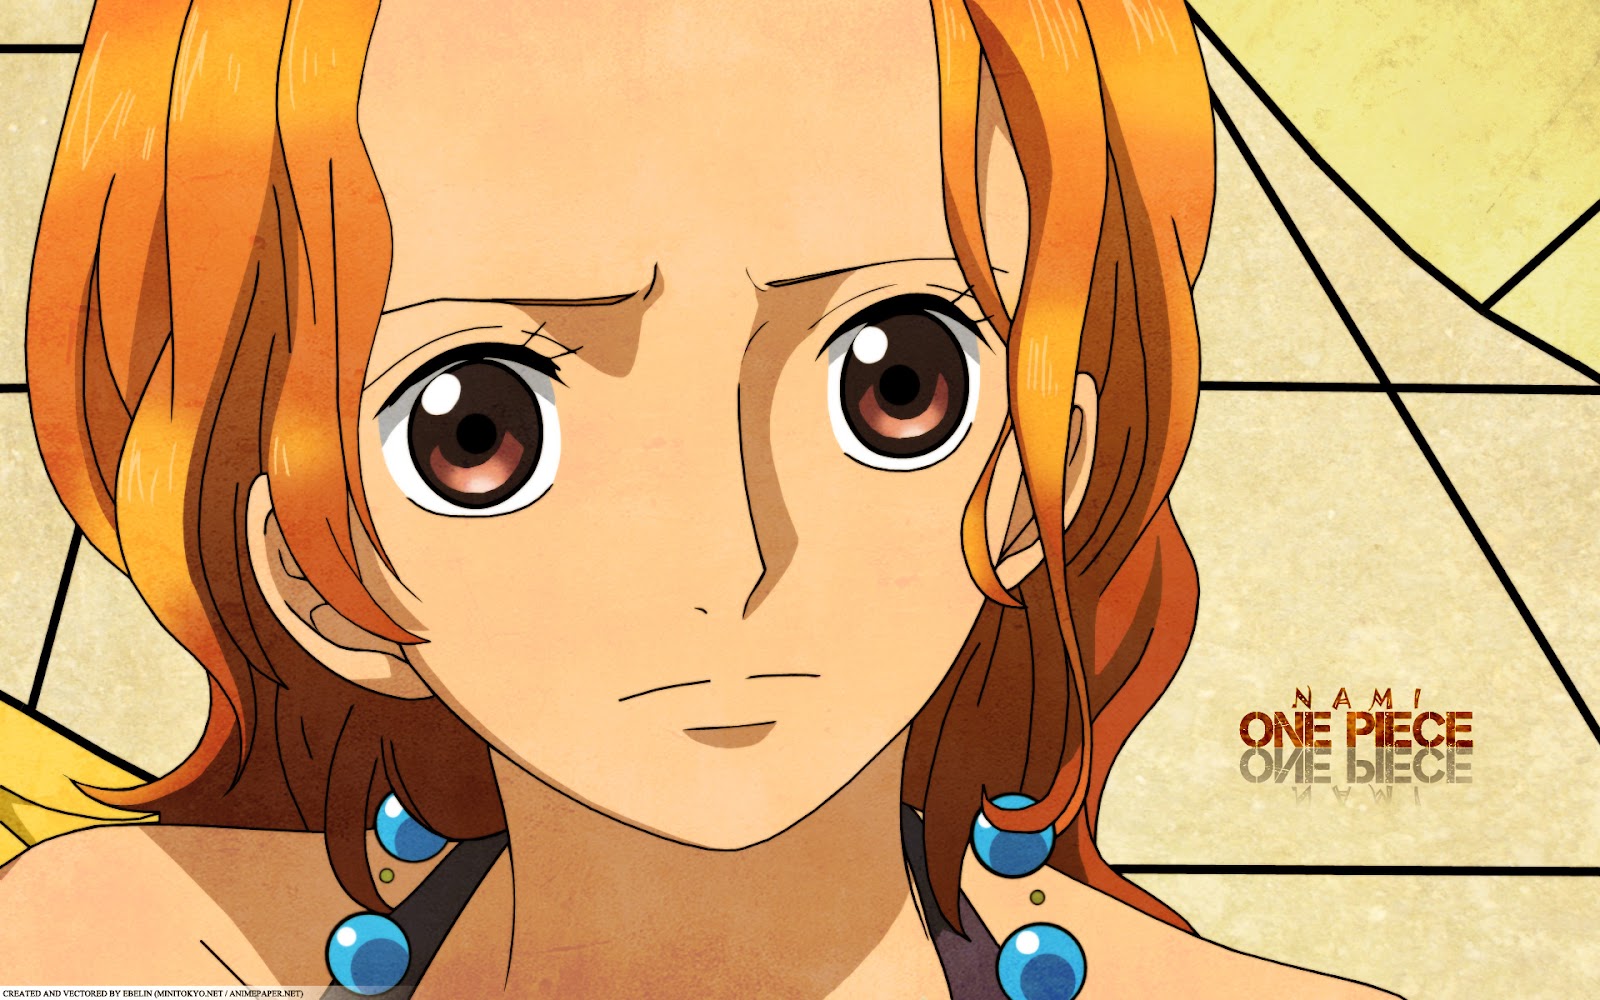 8. Nami from One Piece - wide 8